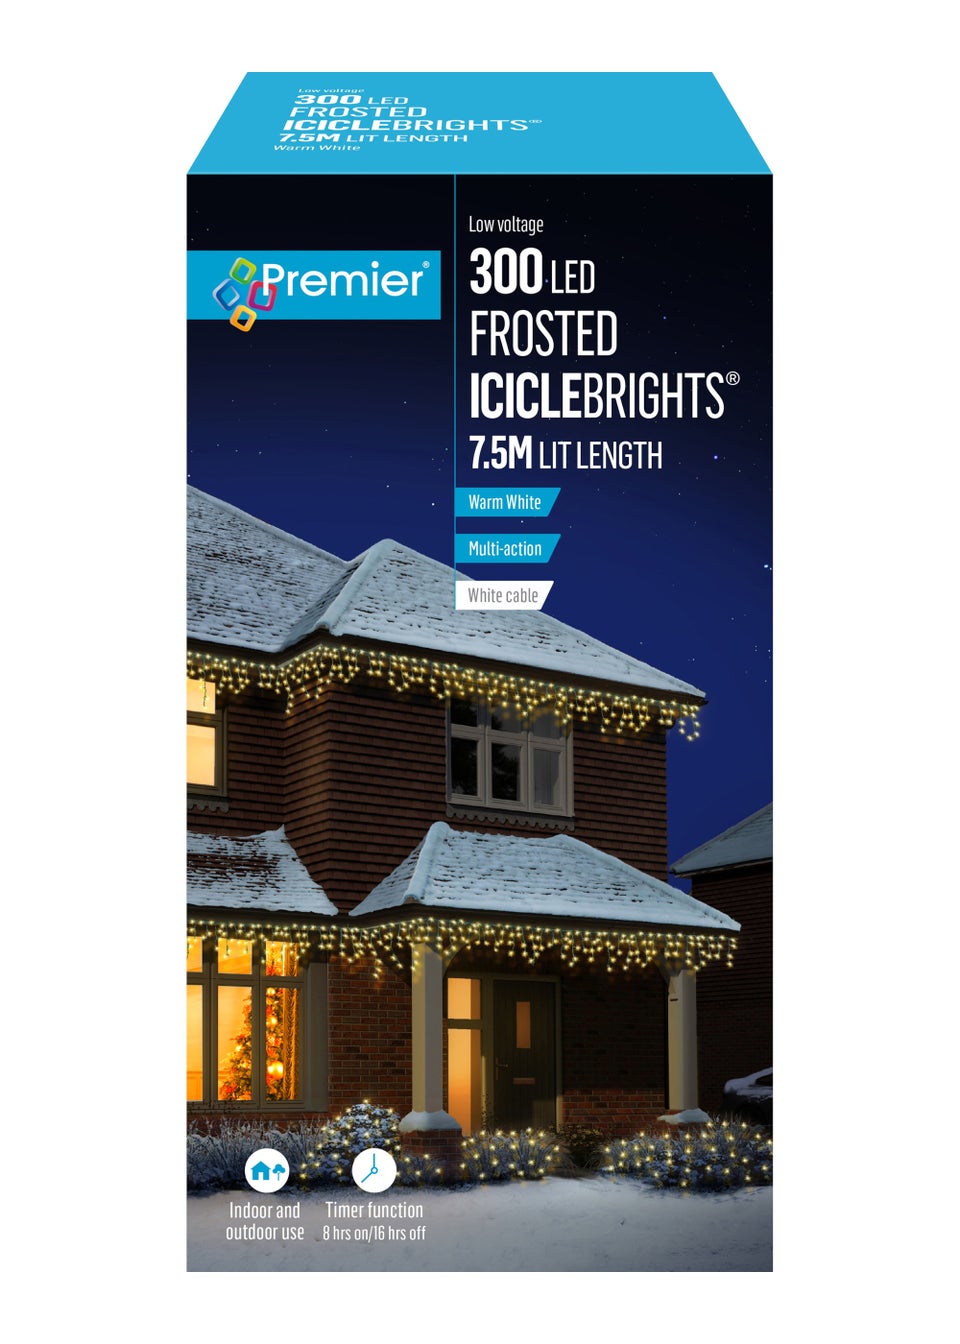 Premier Decorations 300 Warm White LED Frosted Iciclebrights